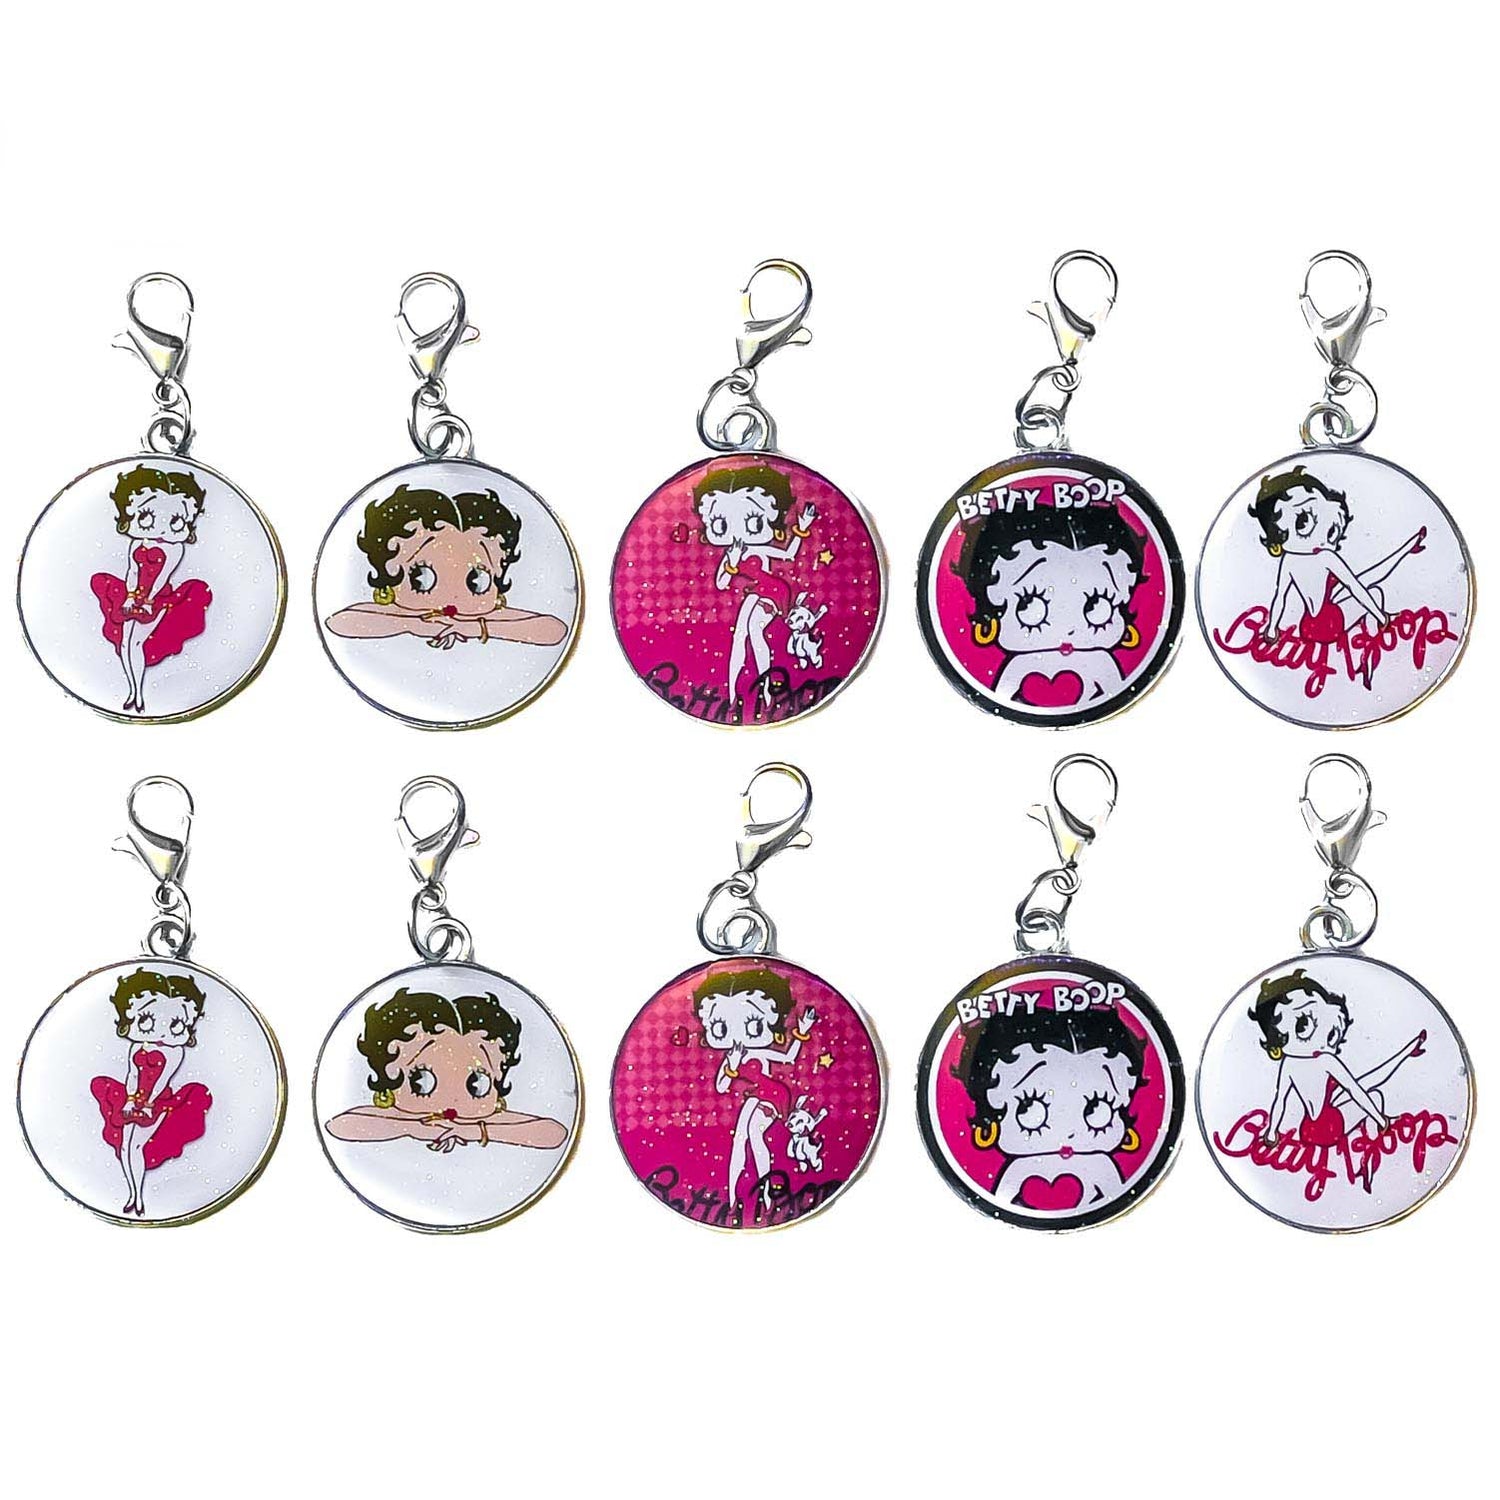 Betty Boop Cabochon Drip Clips Metal Keychain 10 Pack Variety